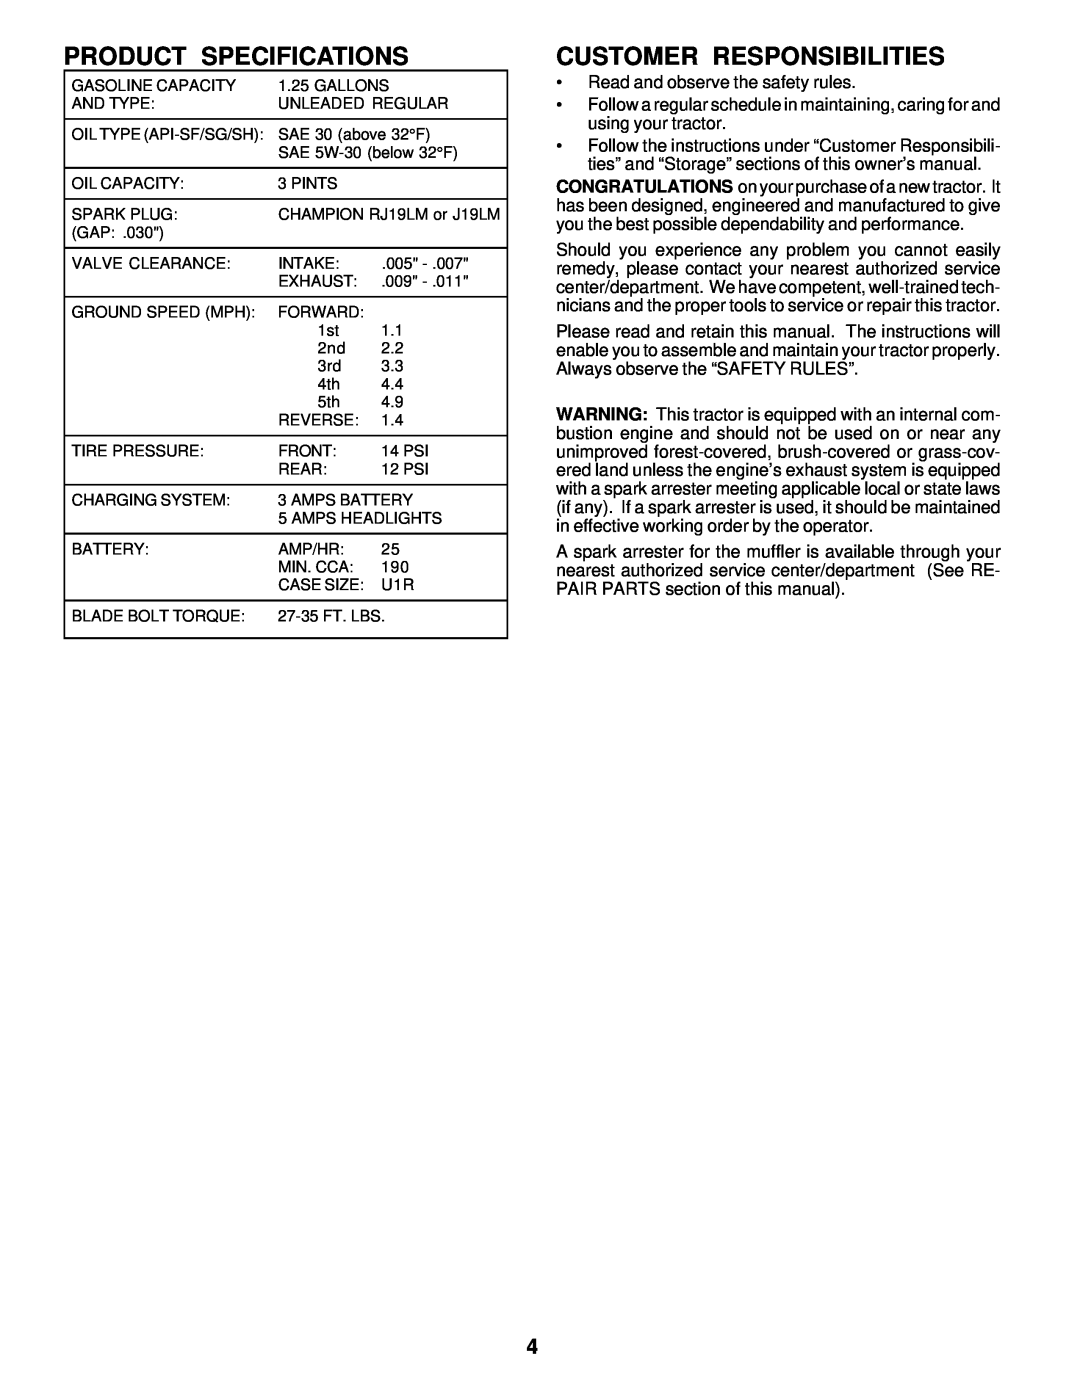 Weed Eater 171883 manual Product Specifications, Customer Responsibilities 